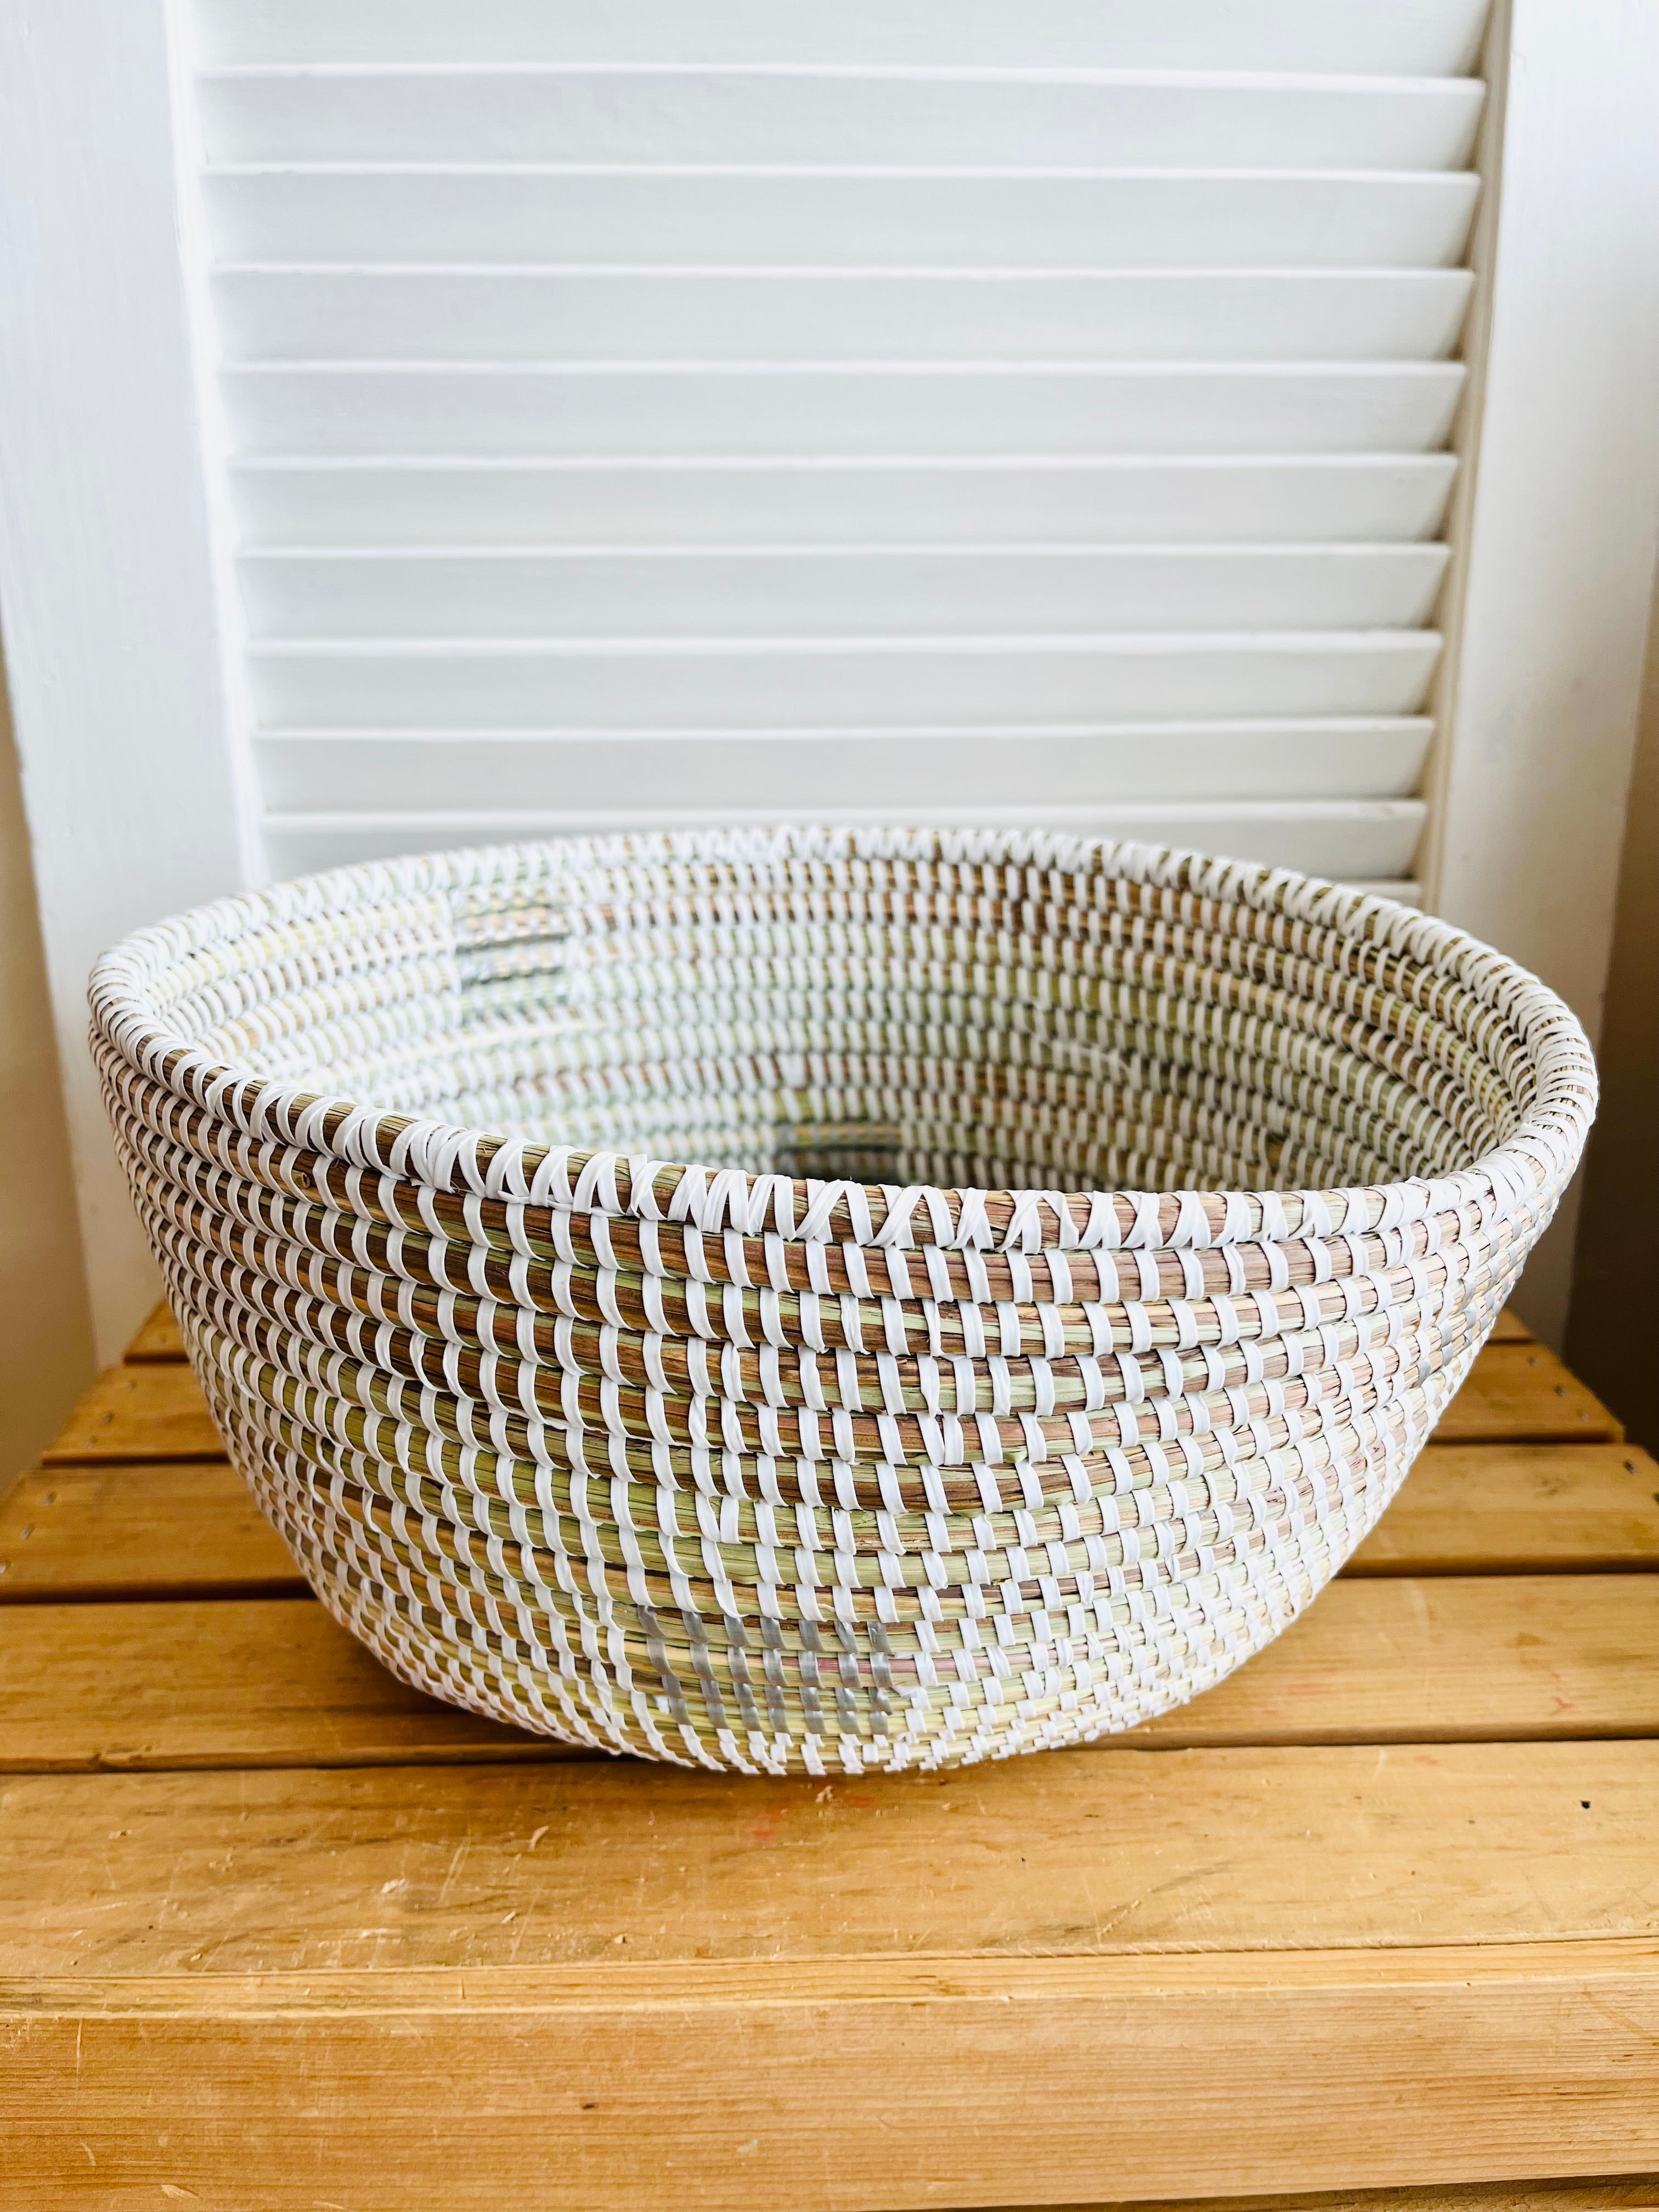 Small White with Silver Dots - Prismatic Pixels - Oval basket